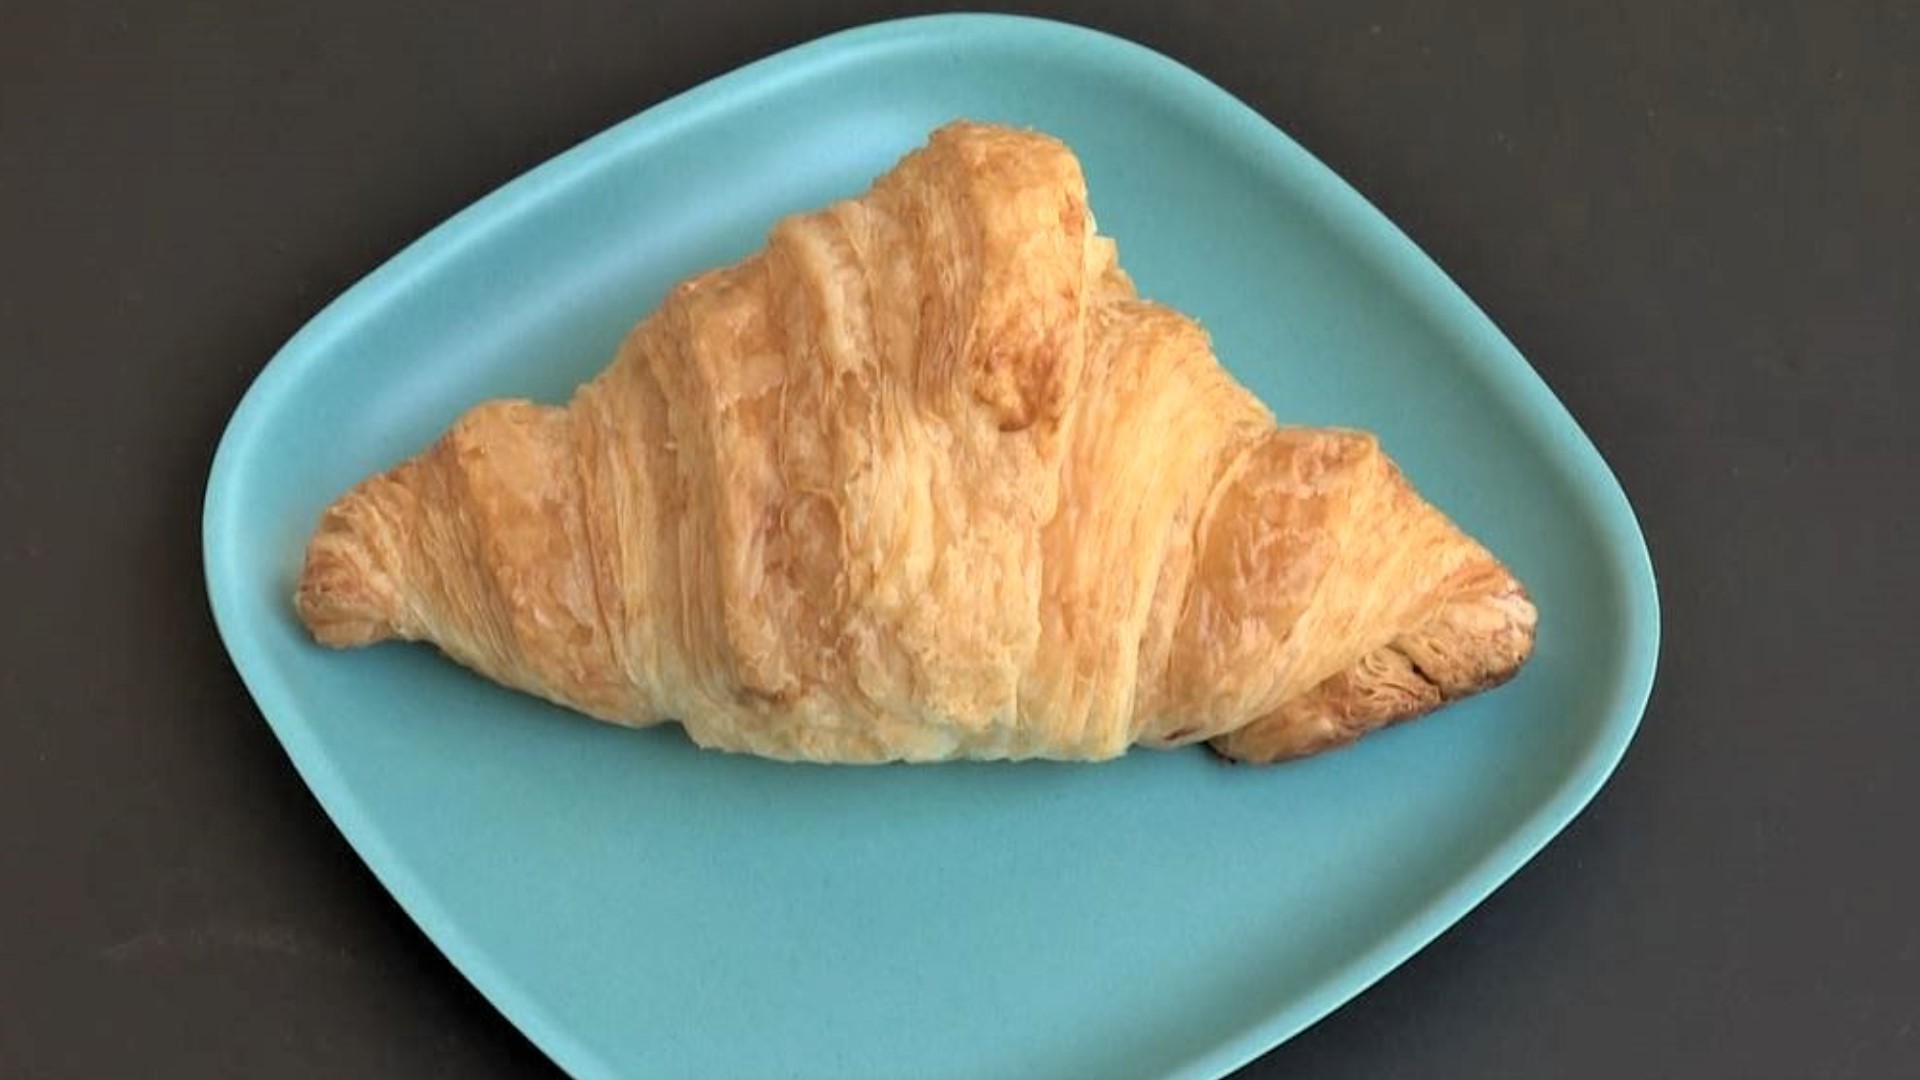 Jeff Powers cycled to, tasted, and ranked croissants from 30 bakeries. #k5evening